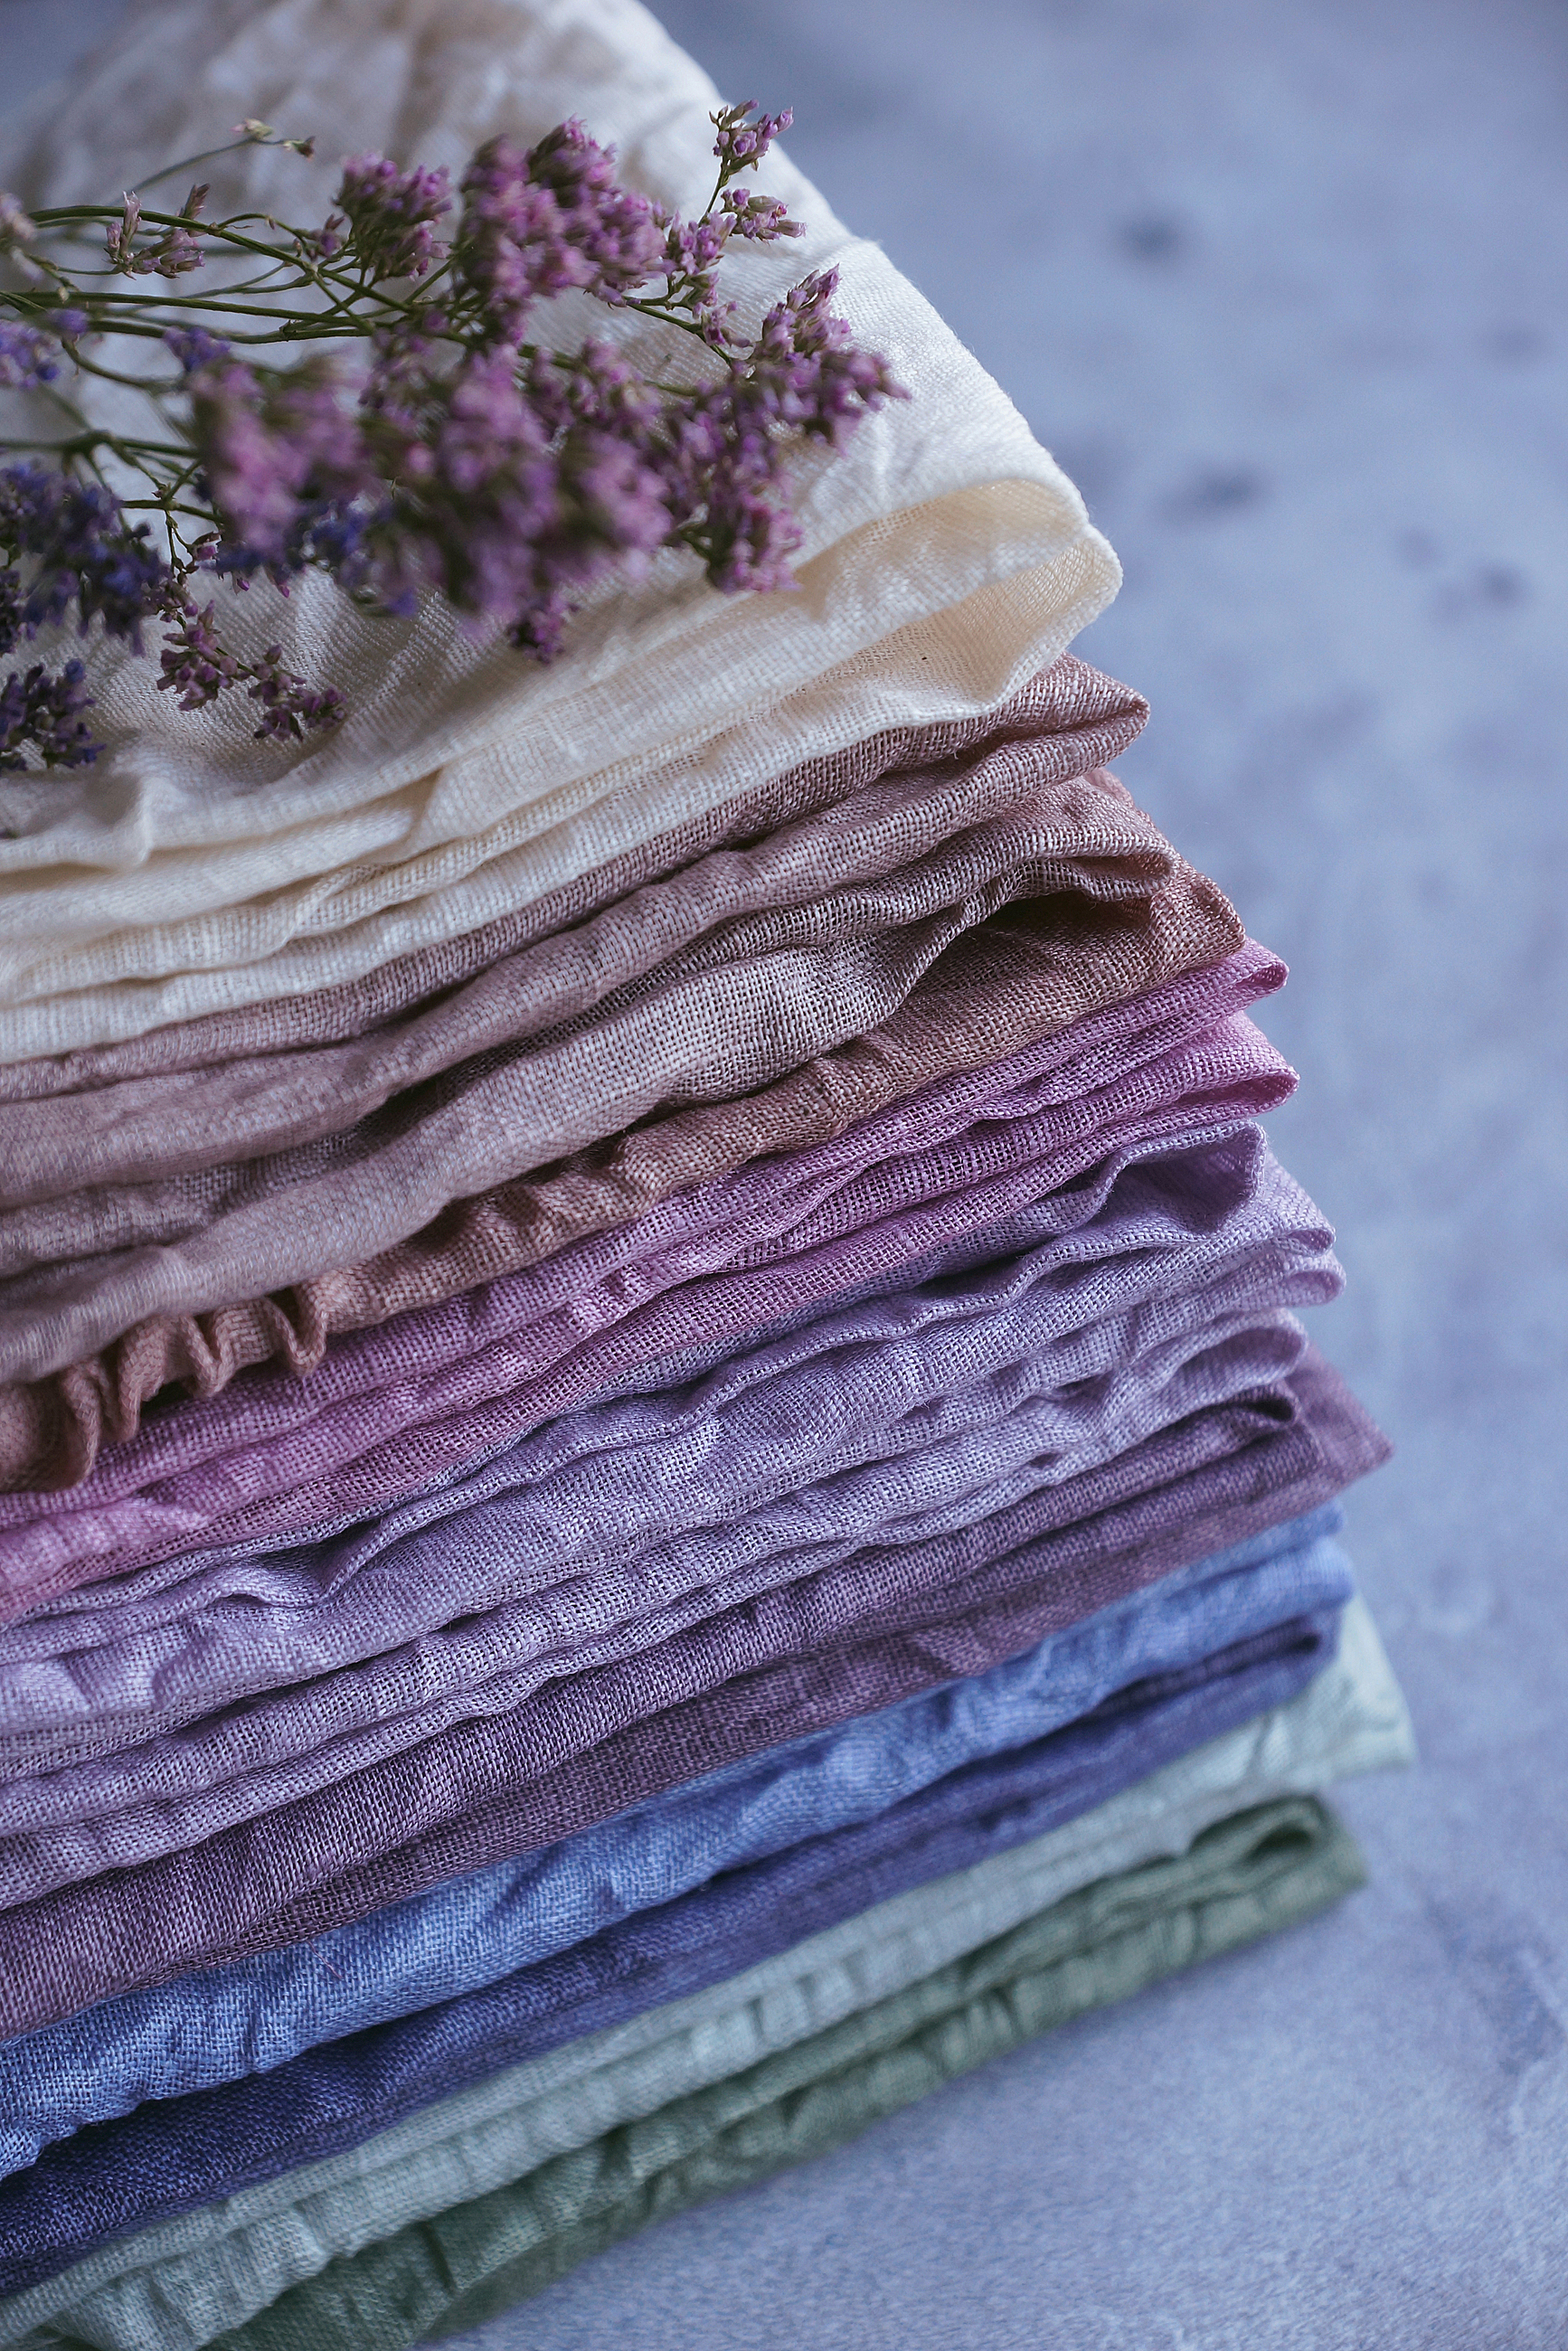 A pile of cotton fabric